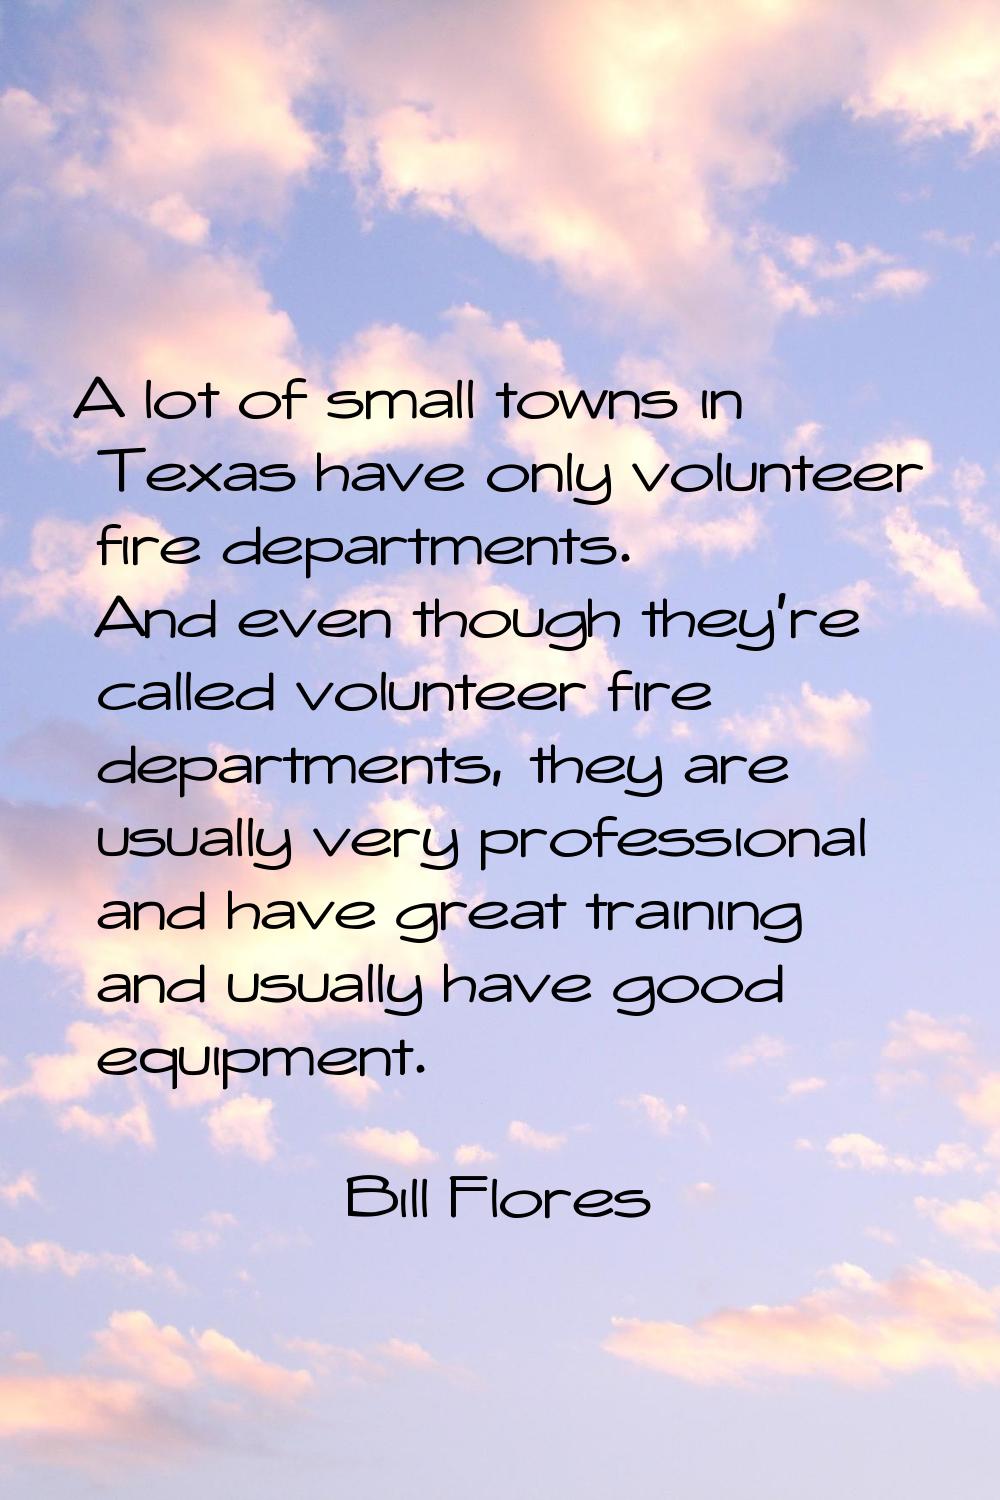 A lot of small towns in Texas have only volunteer fire departments. And even though they're called 